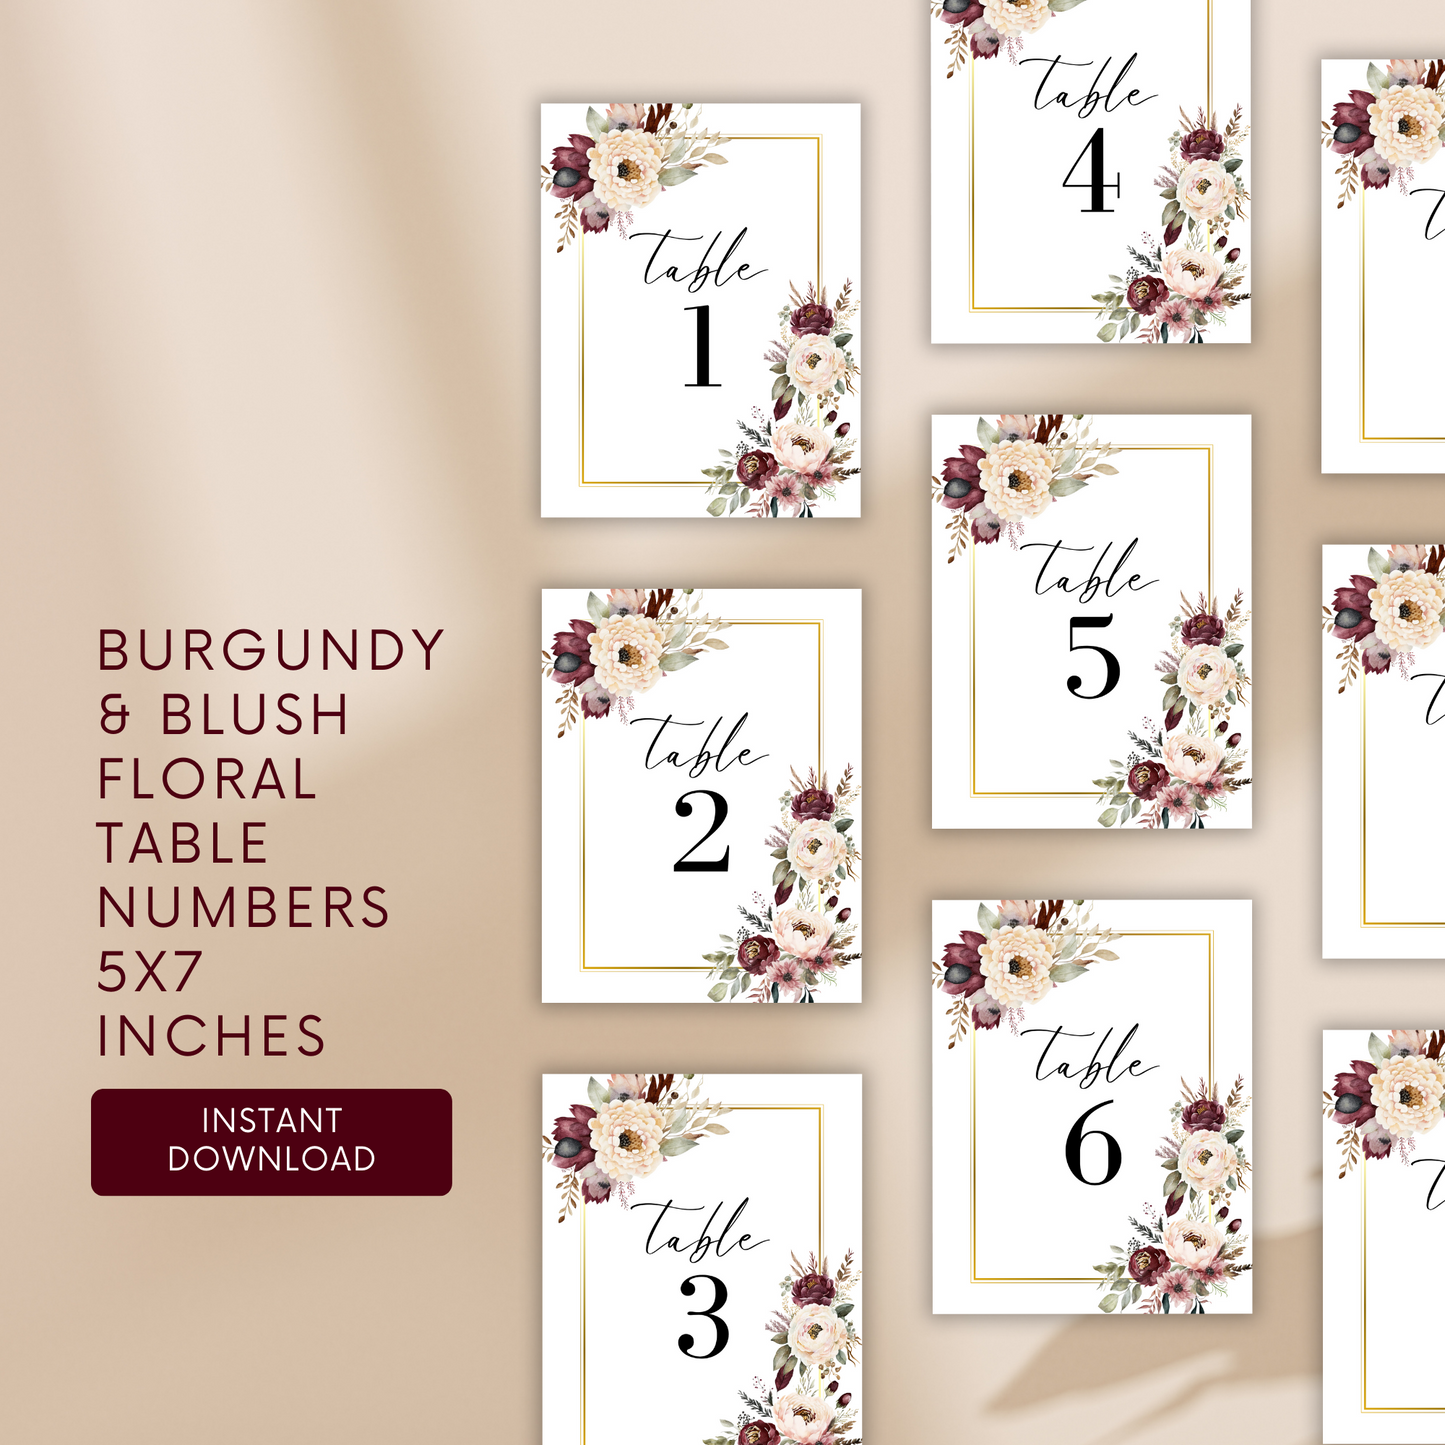 Burgundy & Blush Floral Table Numbers Template | 5x7 Table Numbers Printable | Wedding Floral Table Numbers | BURGBLUSHFLORAL